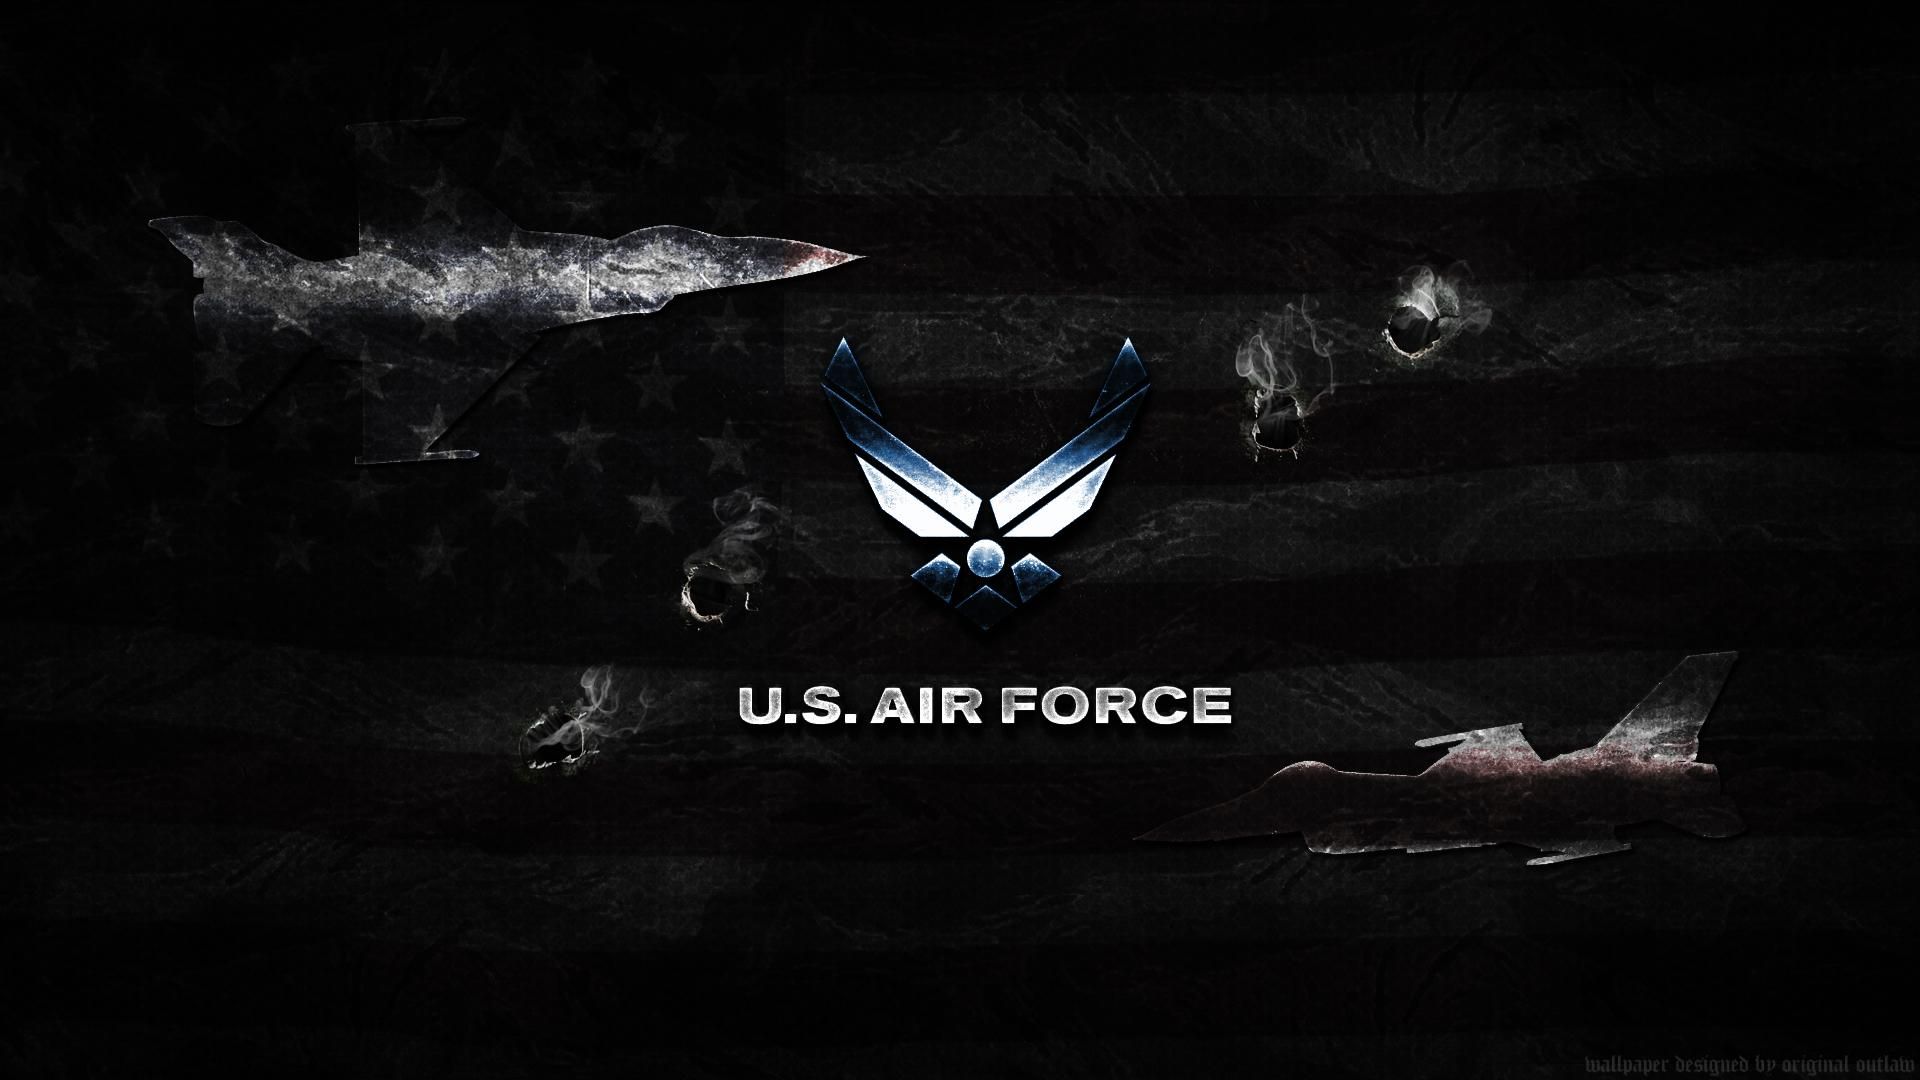 United States Air Force Wallpaper Wallpaper 1280×720 Air Force Wallpaper (41 Wallpaper). Adorable Wallpap. Air force wallpaper, Us air force logo, Air force